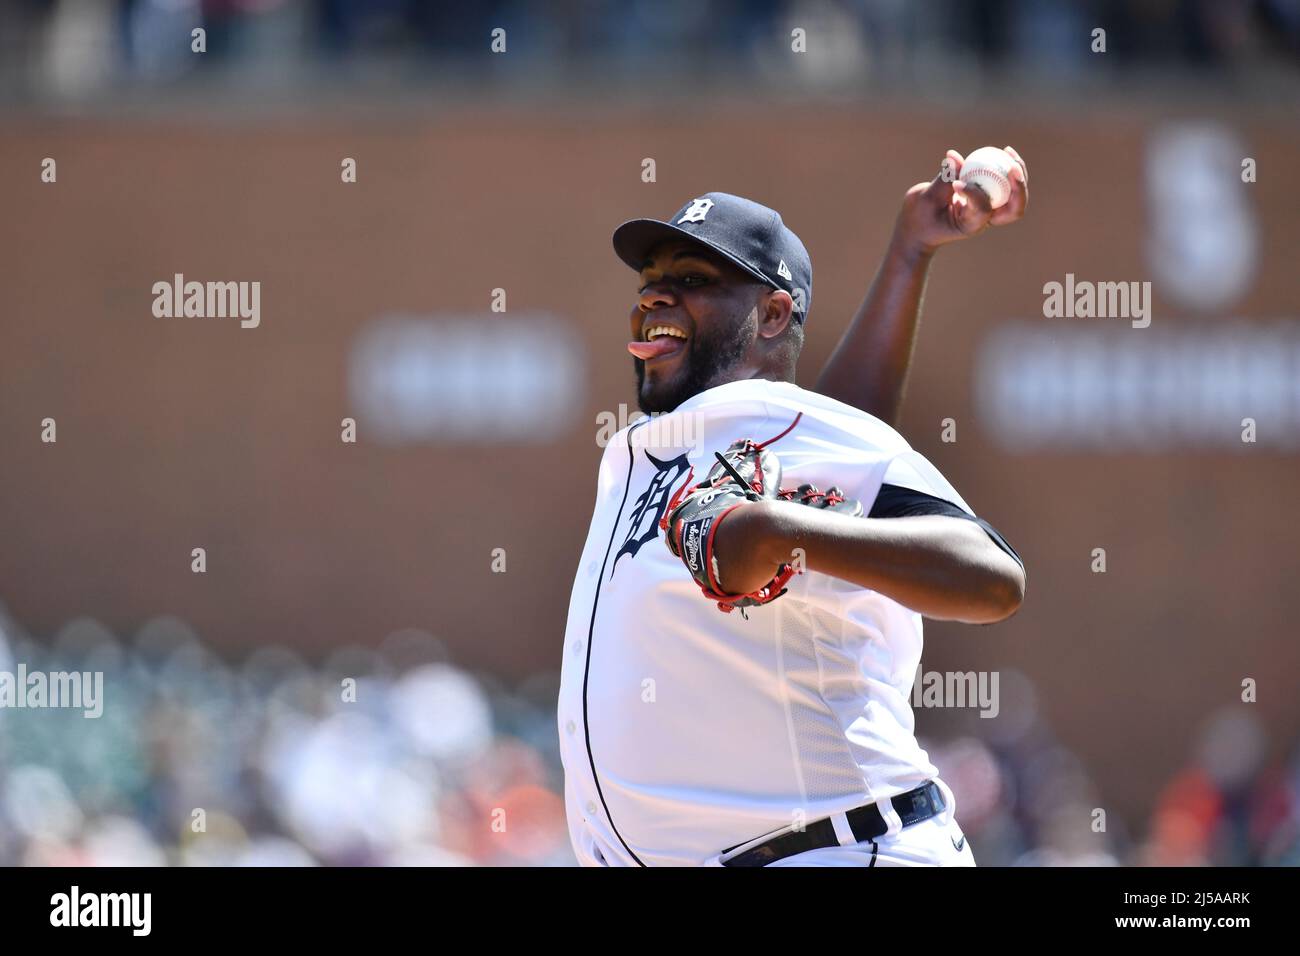 DETROIT, MI - APRIL 21: Detroit Tigers SP Michael Pineda (56) in action  during the game between New York Yankeesand Detroit Tigers on April 21, 2022  at Comerica Park in Detroit, MI (